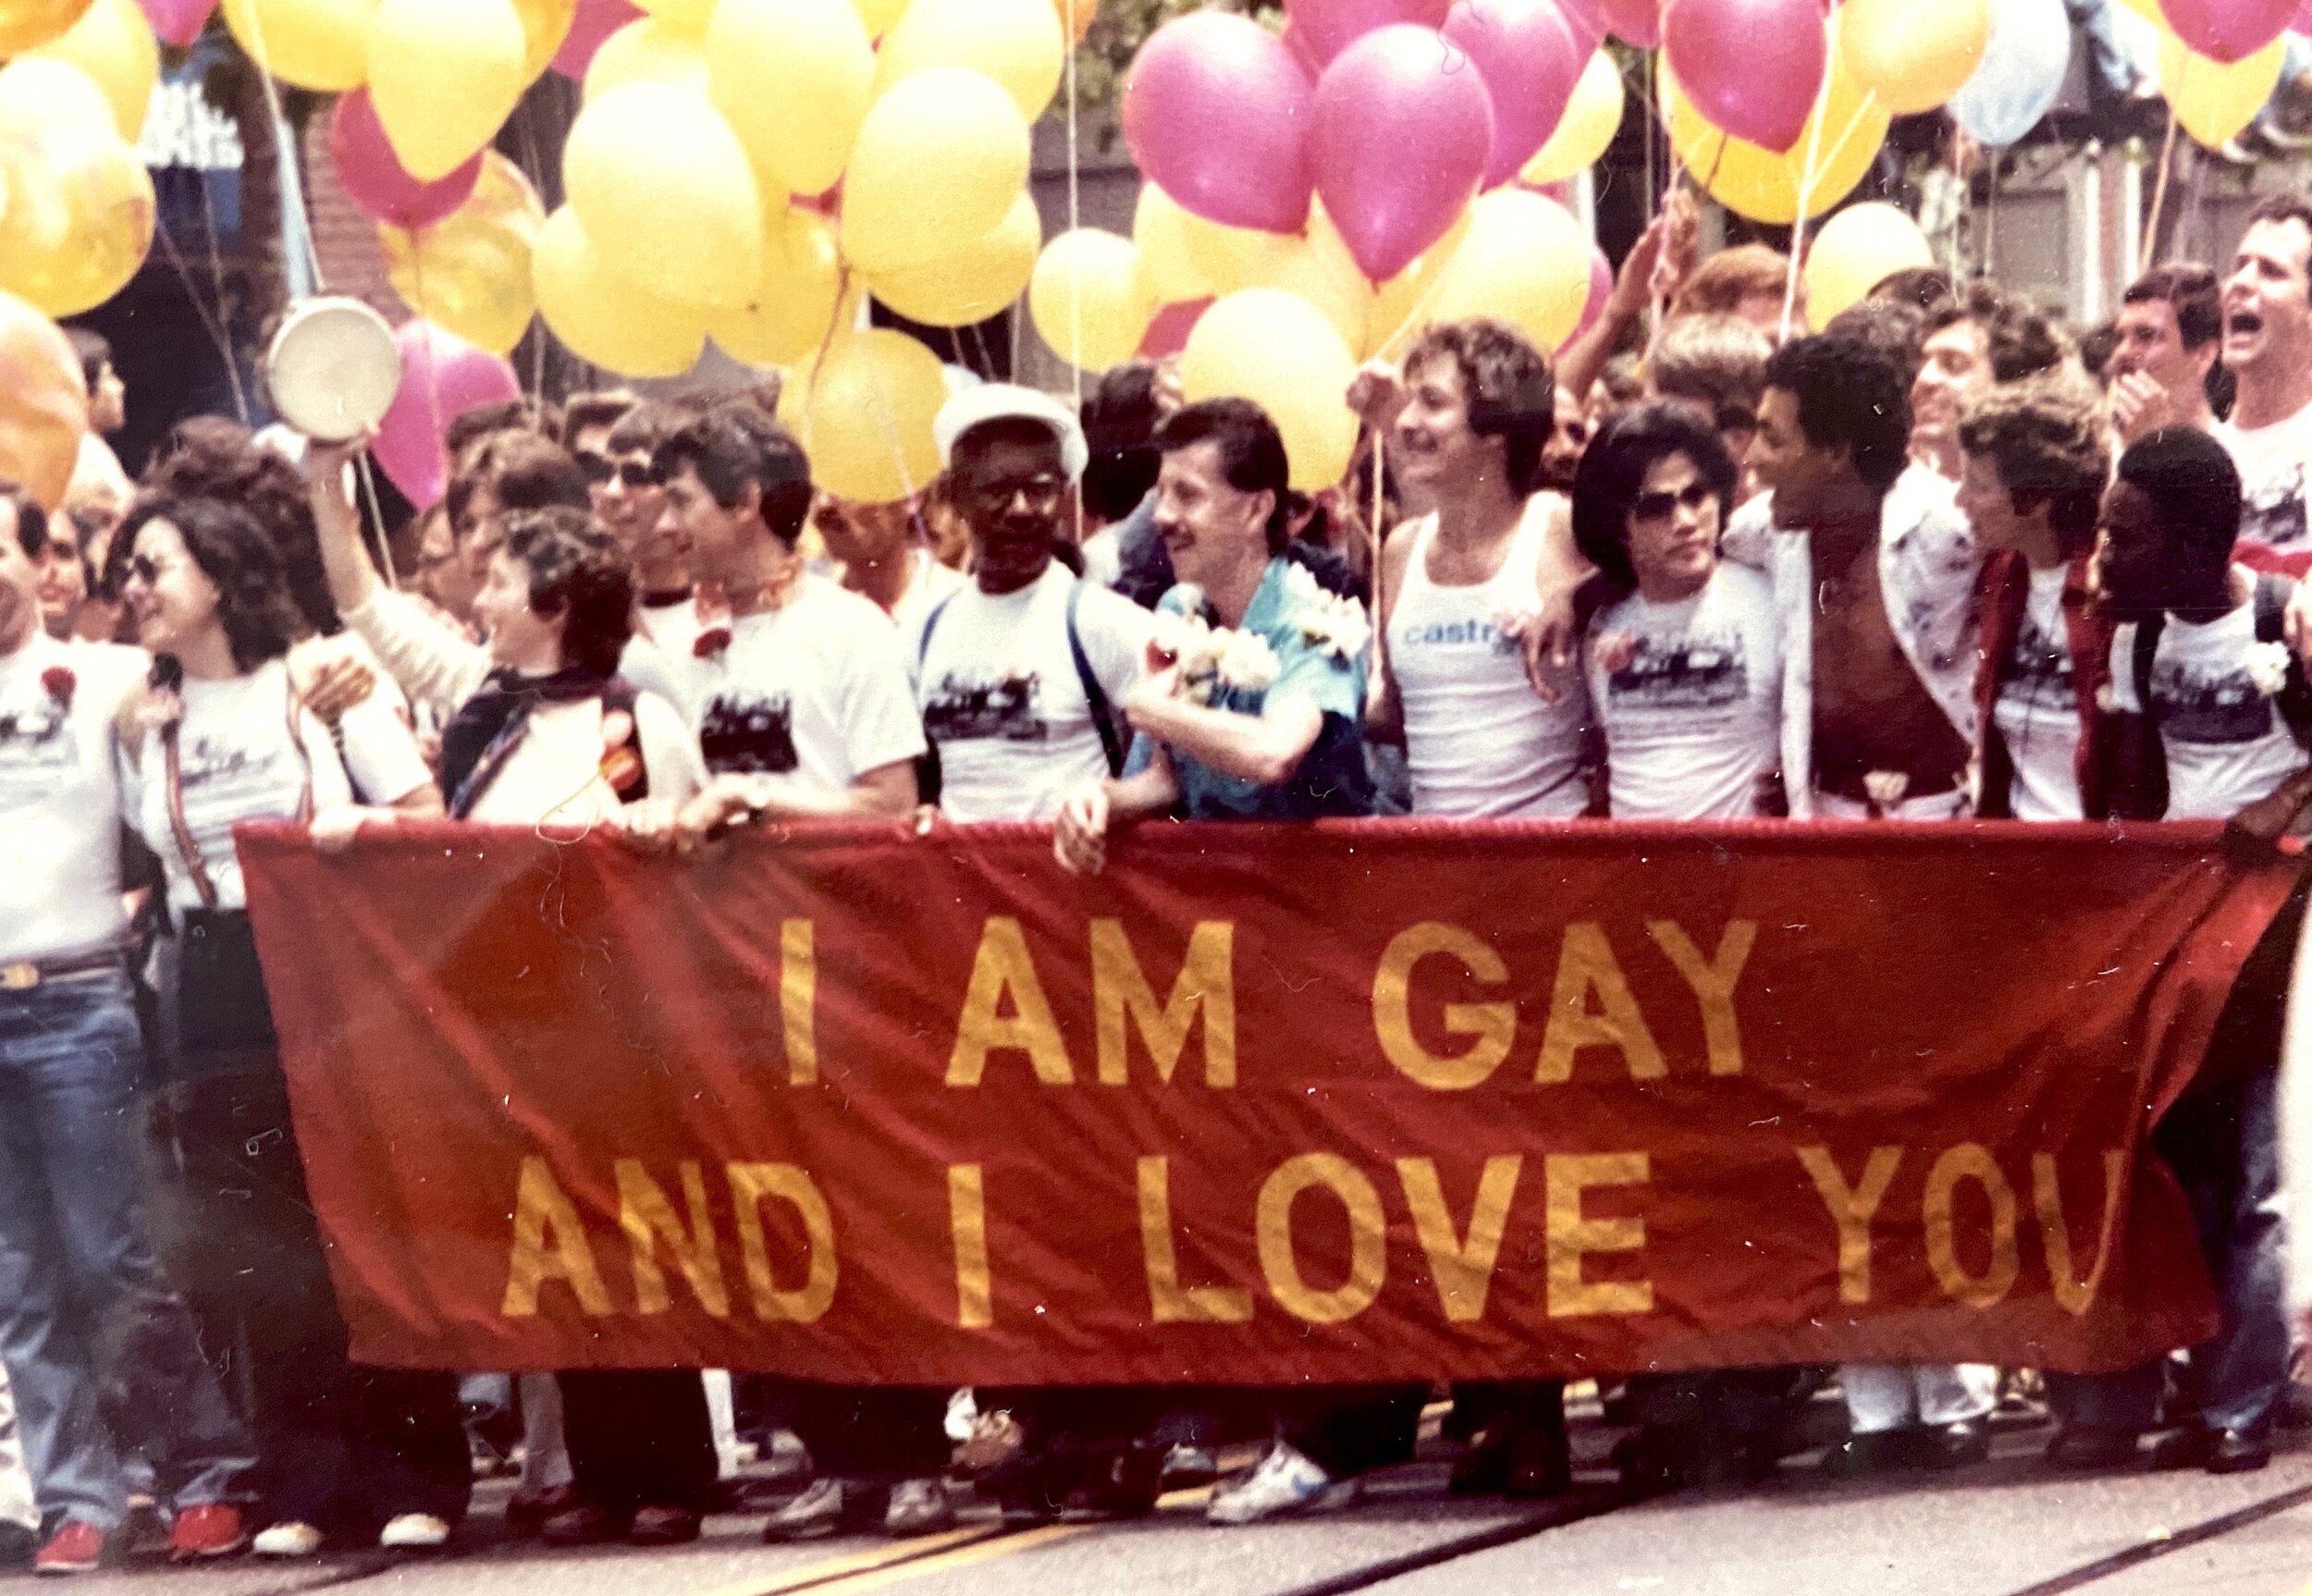  People marching with balloons and a banner that reads “I am gay and I love you,” Gay Freedom Day Parade, 1979; photograph by Ken Hamai, courtesy of photographer, all rights reserved. 